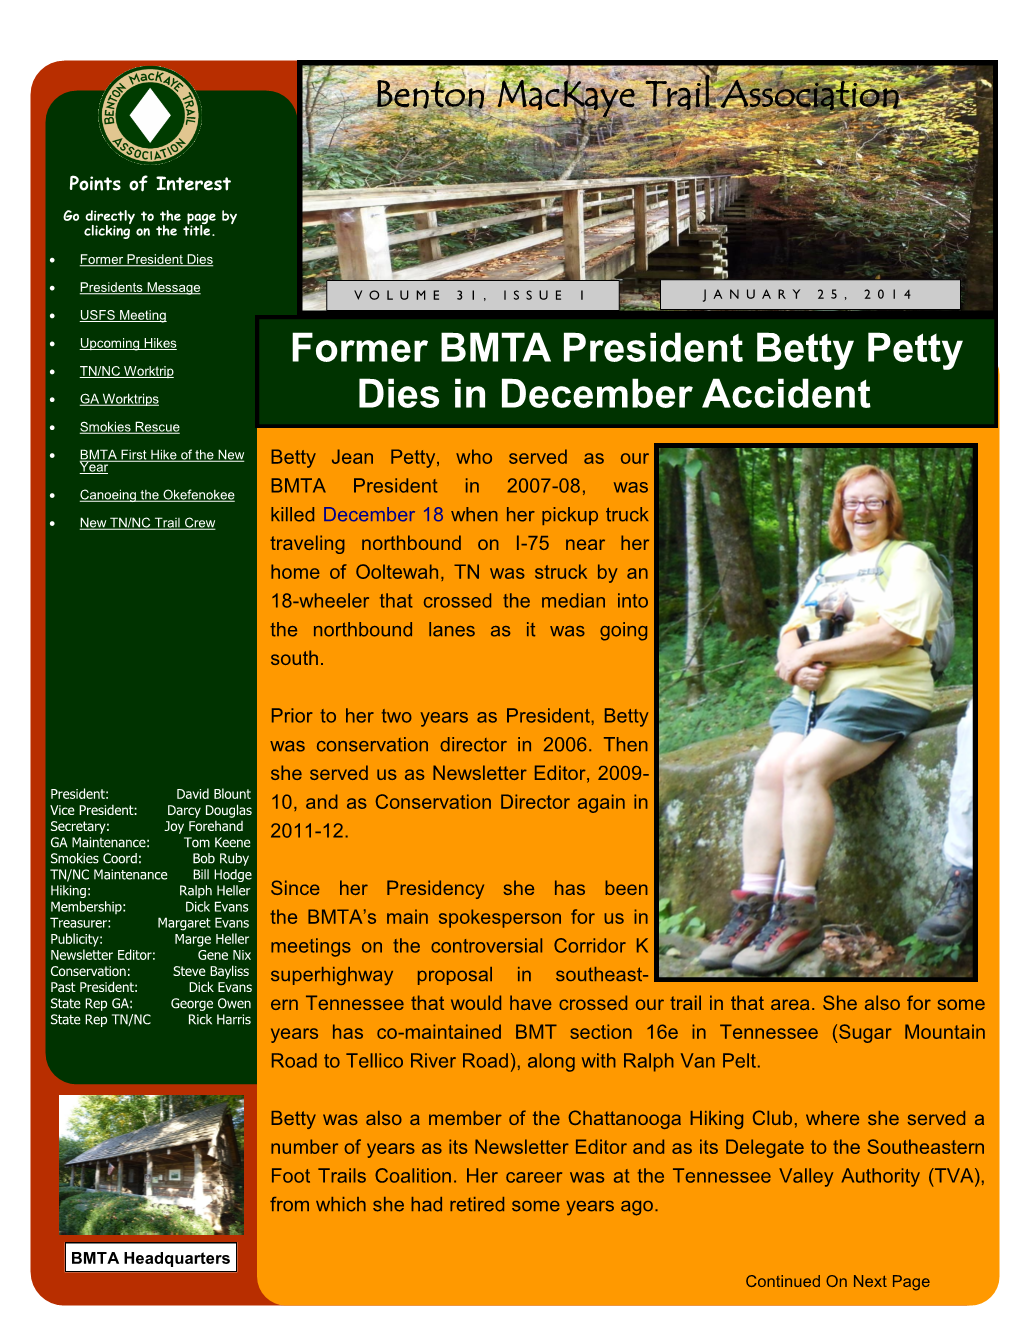 Former BMTA President Betty Petty Dies in December Accident